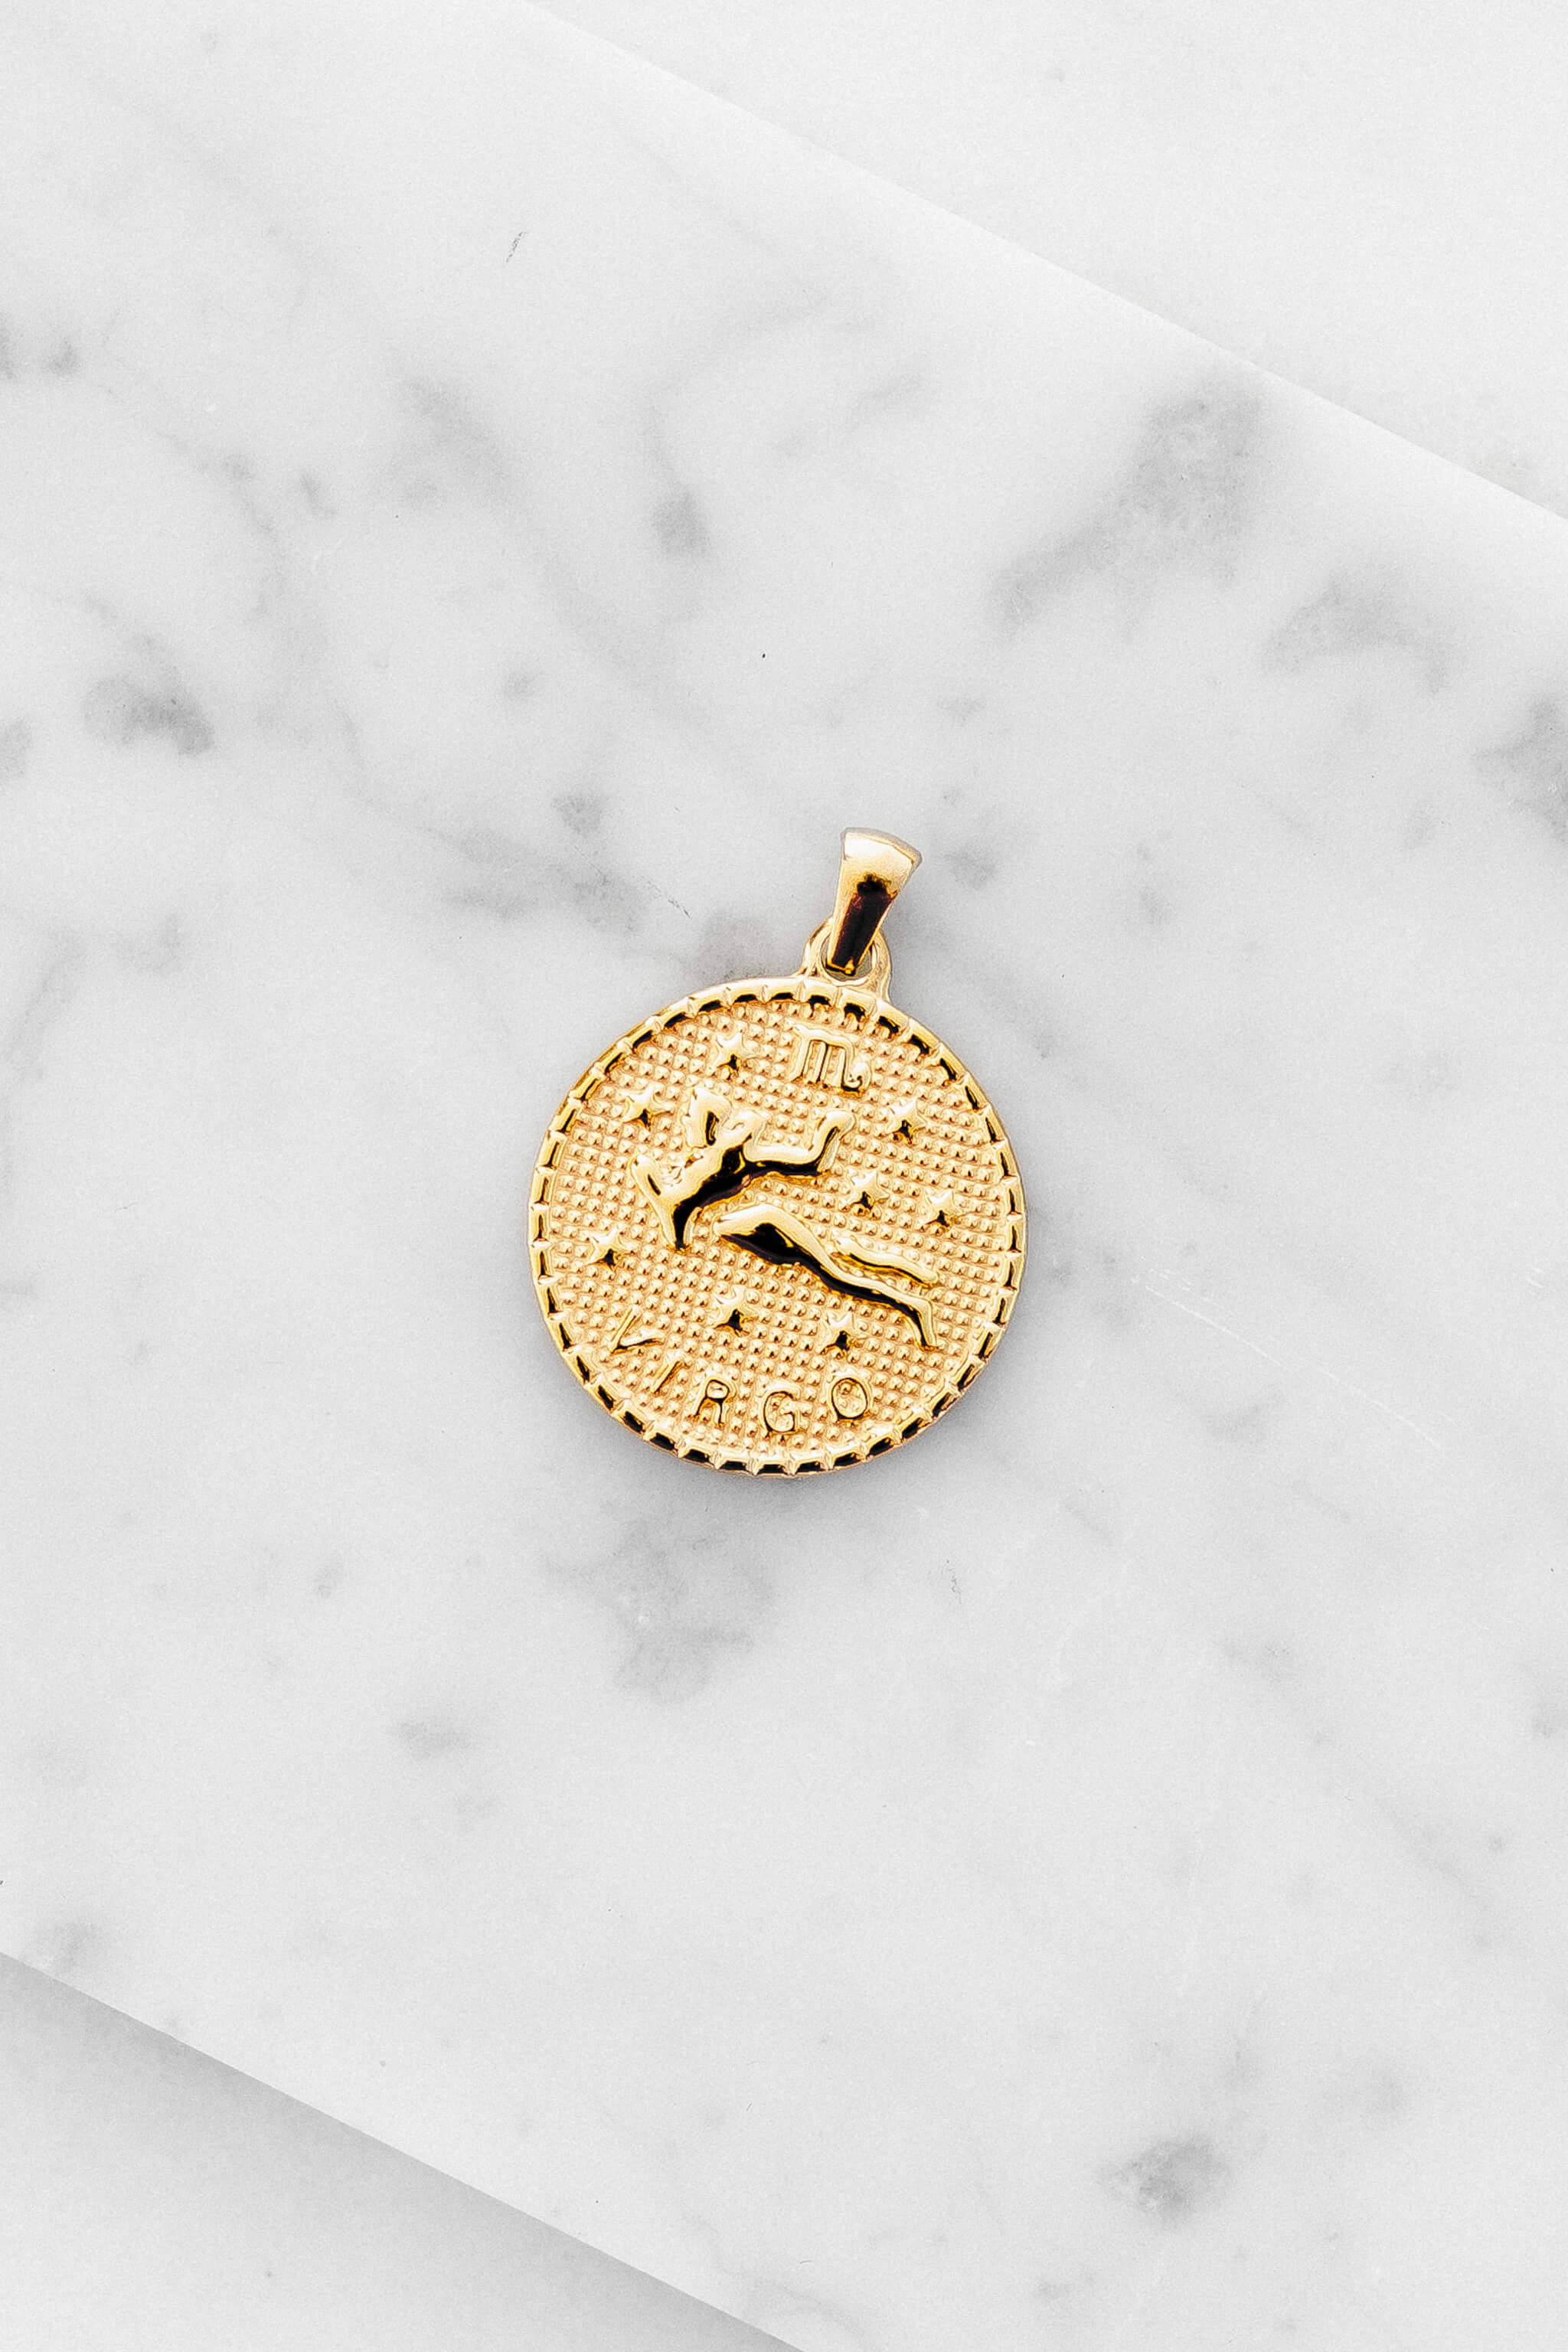 Virgo zodiac sign gold coin charm laying on a white marble